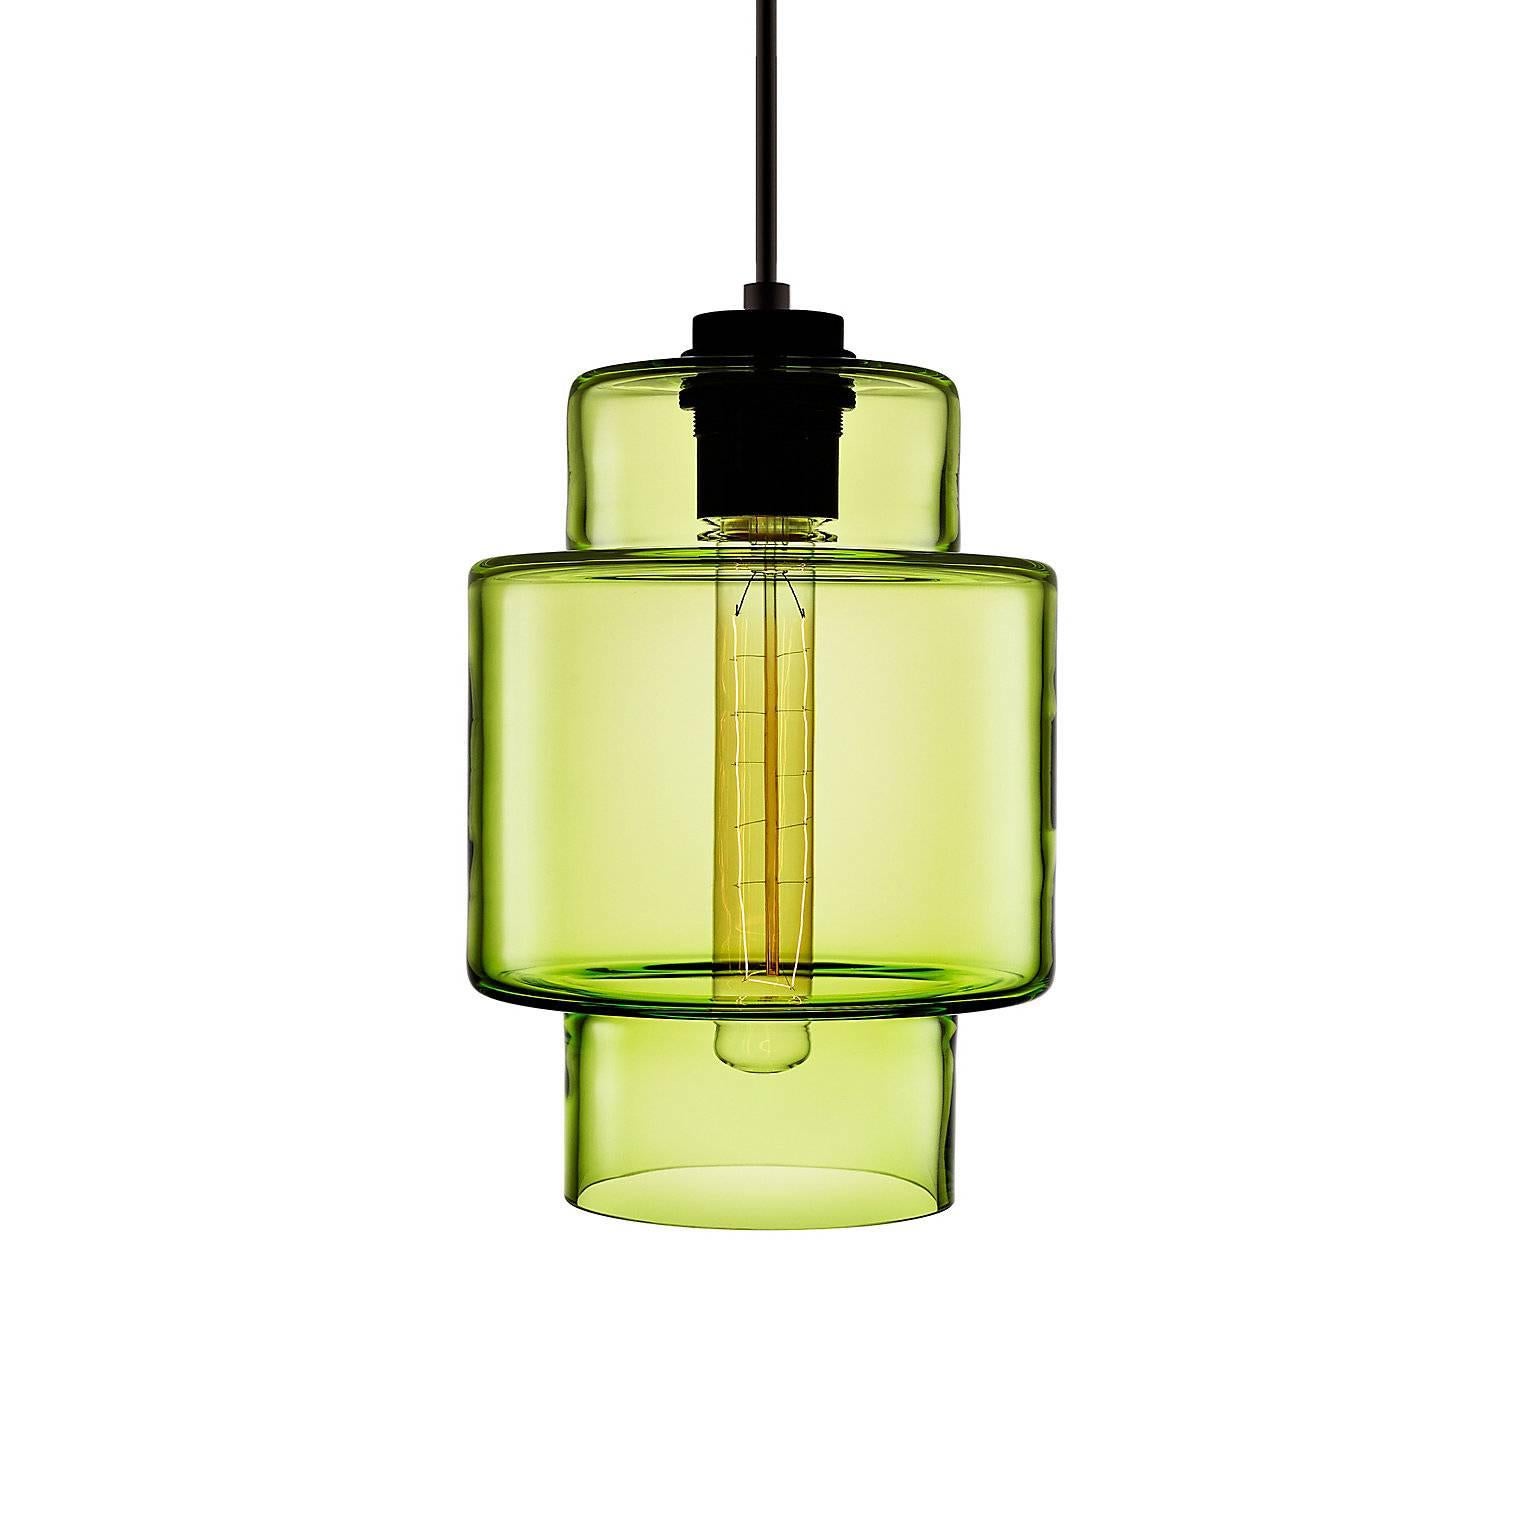 Unique to the Crystalline Series, the Axia pendant lights explore defined edges and a dynamic range of vibrant colors. Pairs easily with the Trove, Delinea, and Calla pendants that also comprise the Crystalline Series. Every single glass pendant